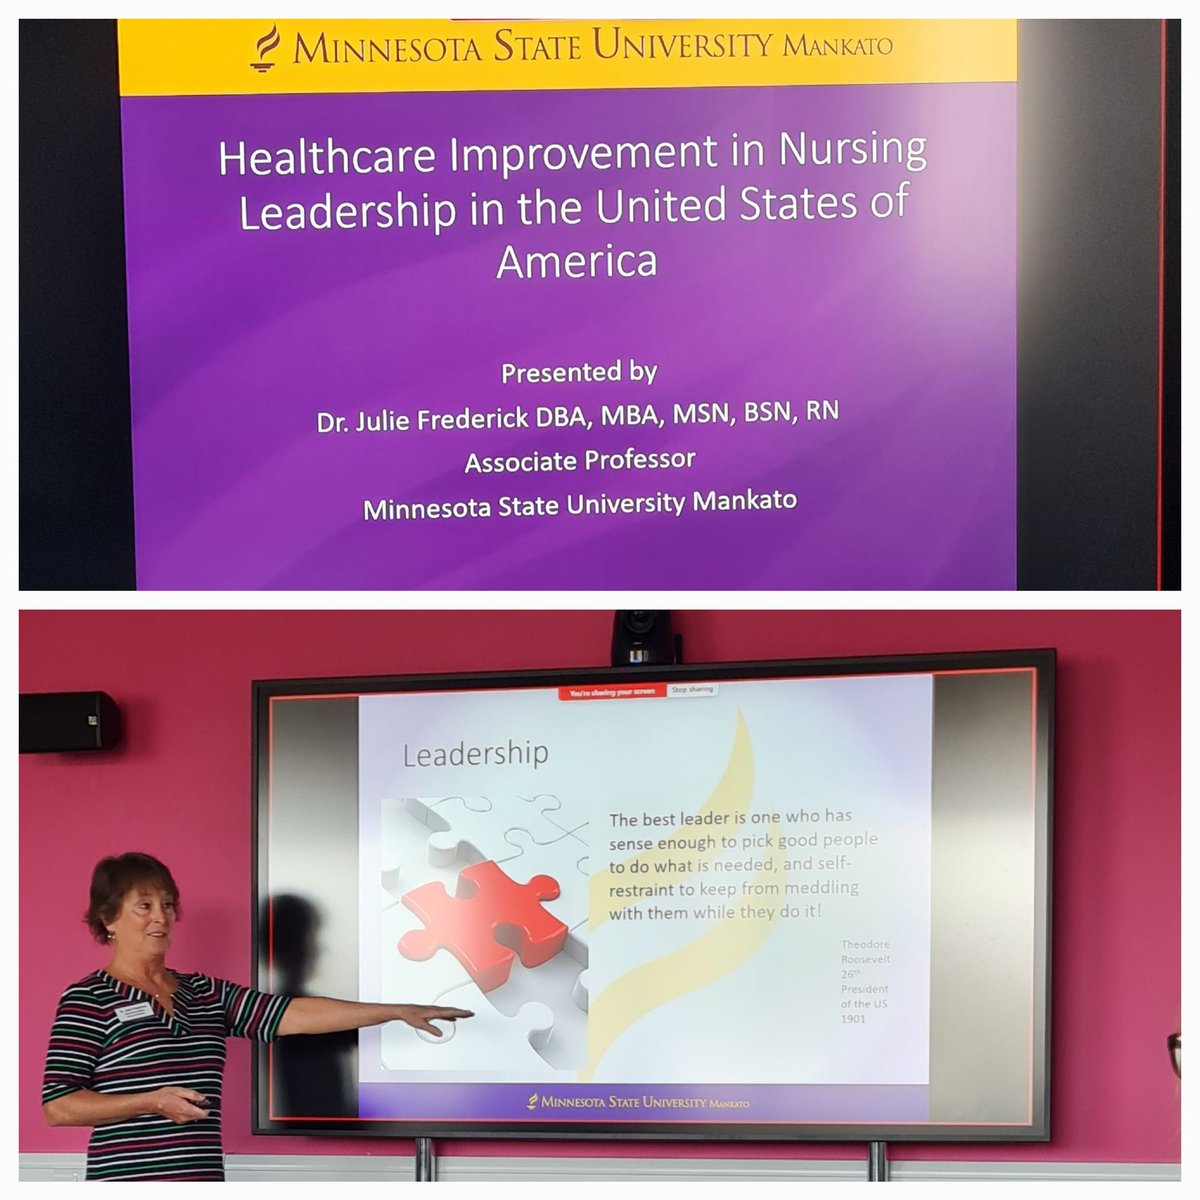 Thanks to Dr. Julie Fredrick for sharing her leadership journey and improvement work today @Stirling_Nurse @MayoClinic Many valuable discussions and ideas had with the @fv_quality team, @karen_goudie and @AshepherdQi #QI